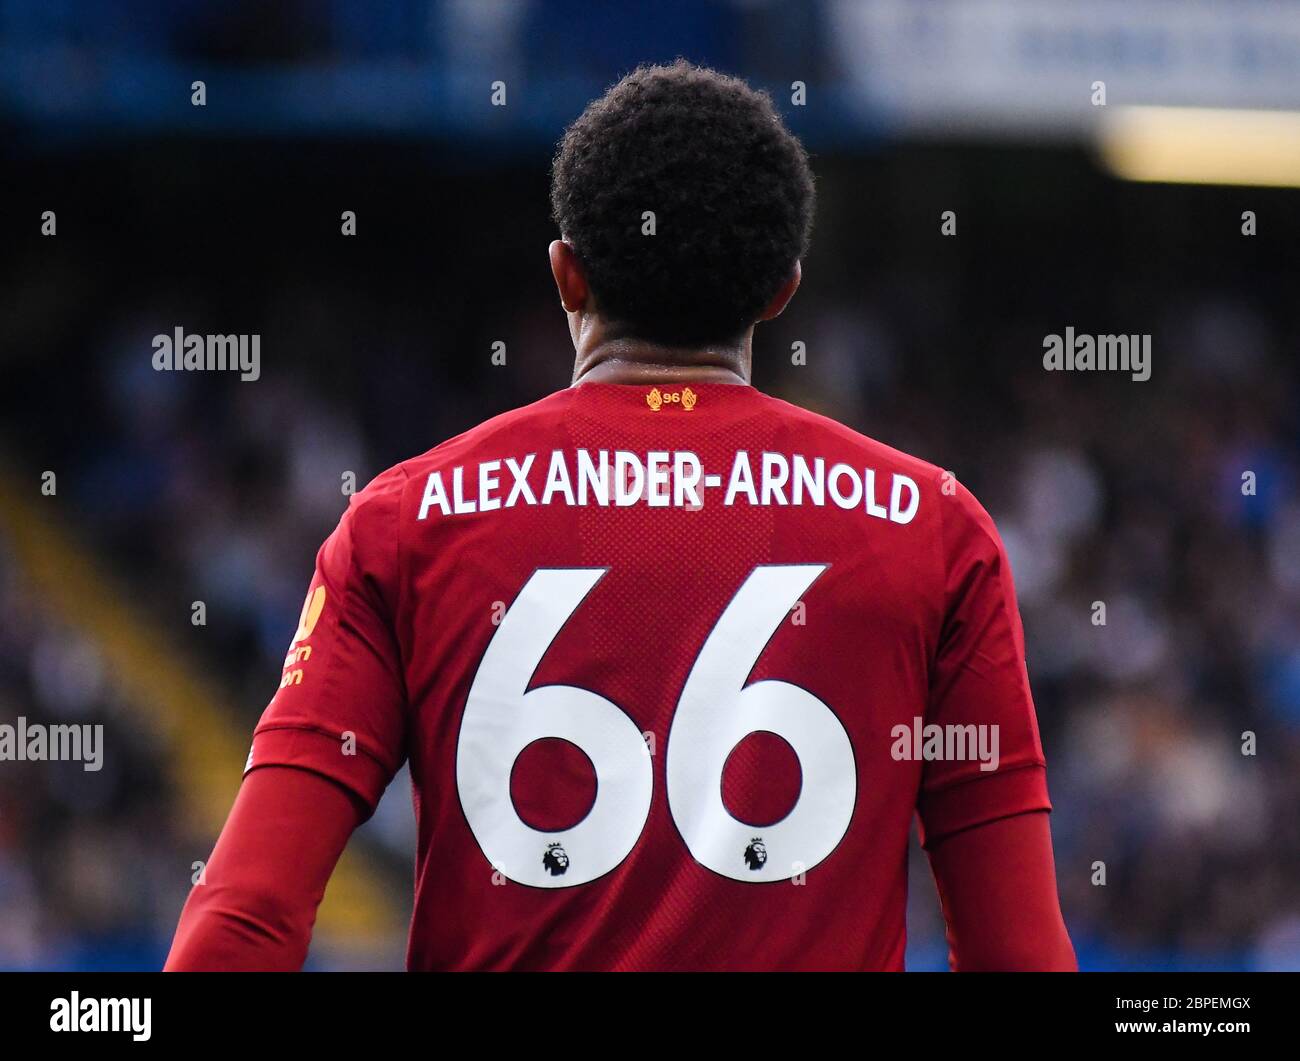 LONDON, ENGLAND - SEPTEMBER 22, 2019: Trent Alexander-Arnold of Liverpool pictured during the 2019/20 Premier League game between Chelsea FC and Liverpool FC at Stamford Bridge. Stock Photo